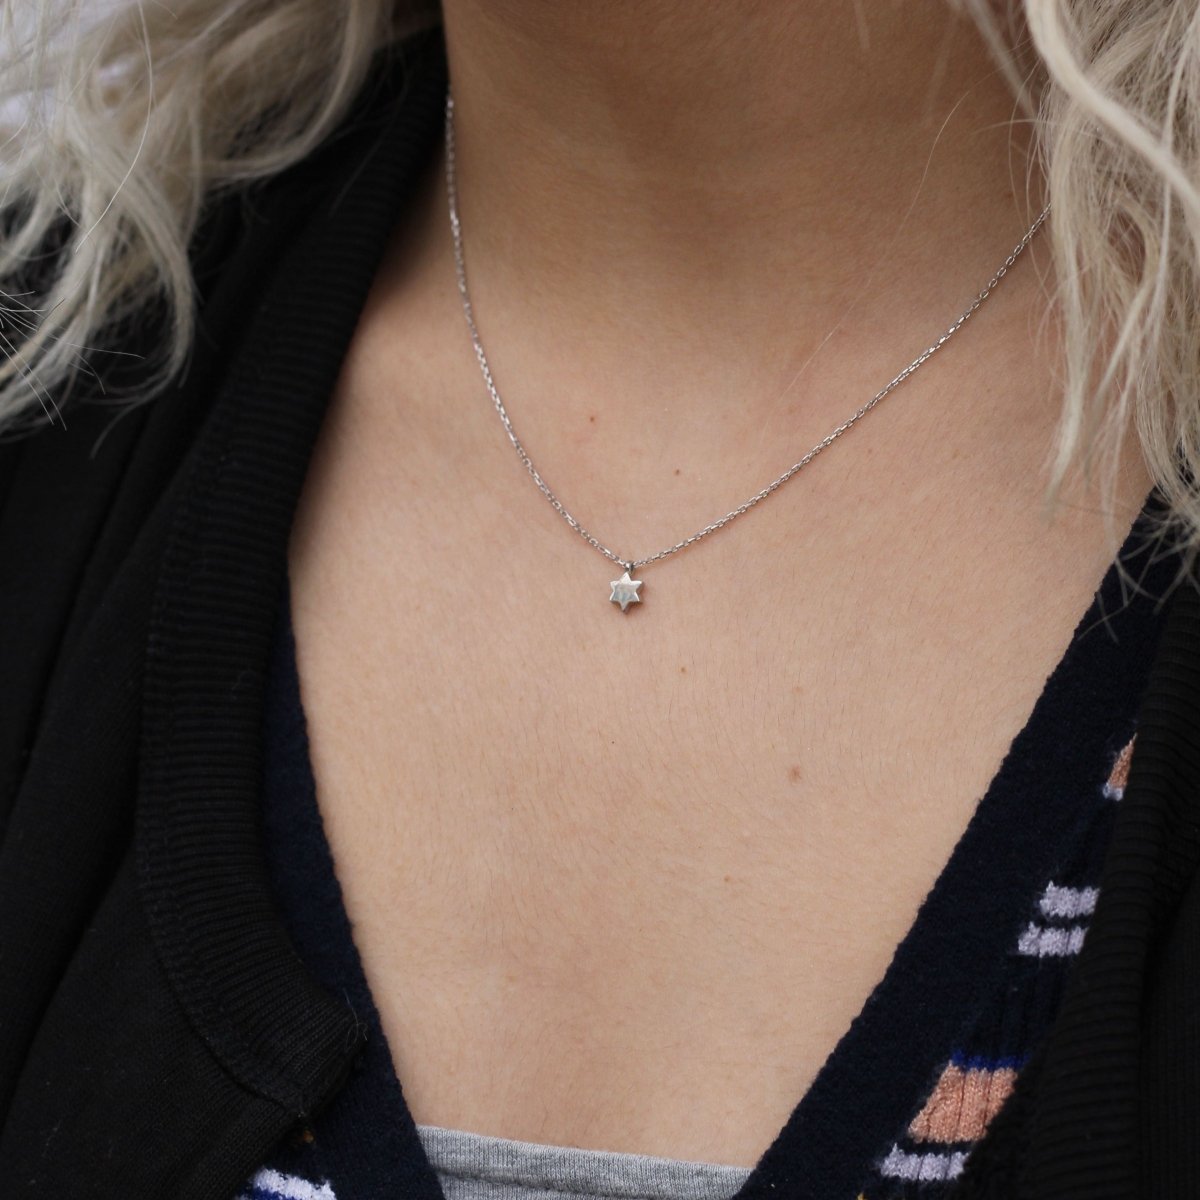 Silver Star of David Necklace | For Our Brave College Students